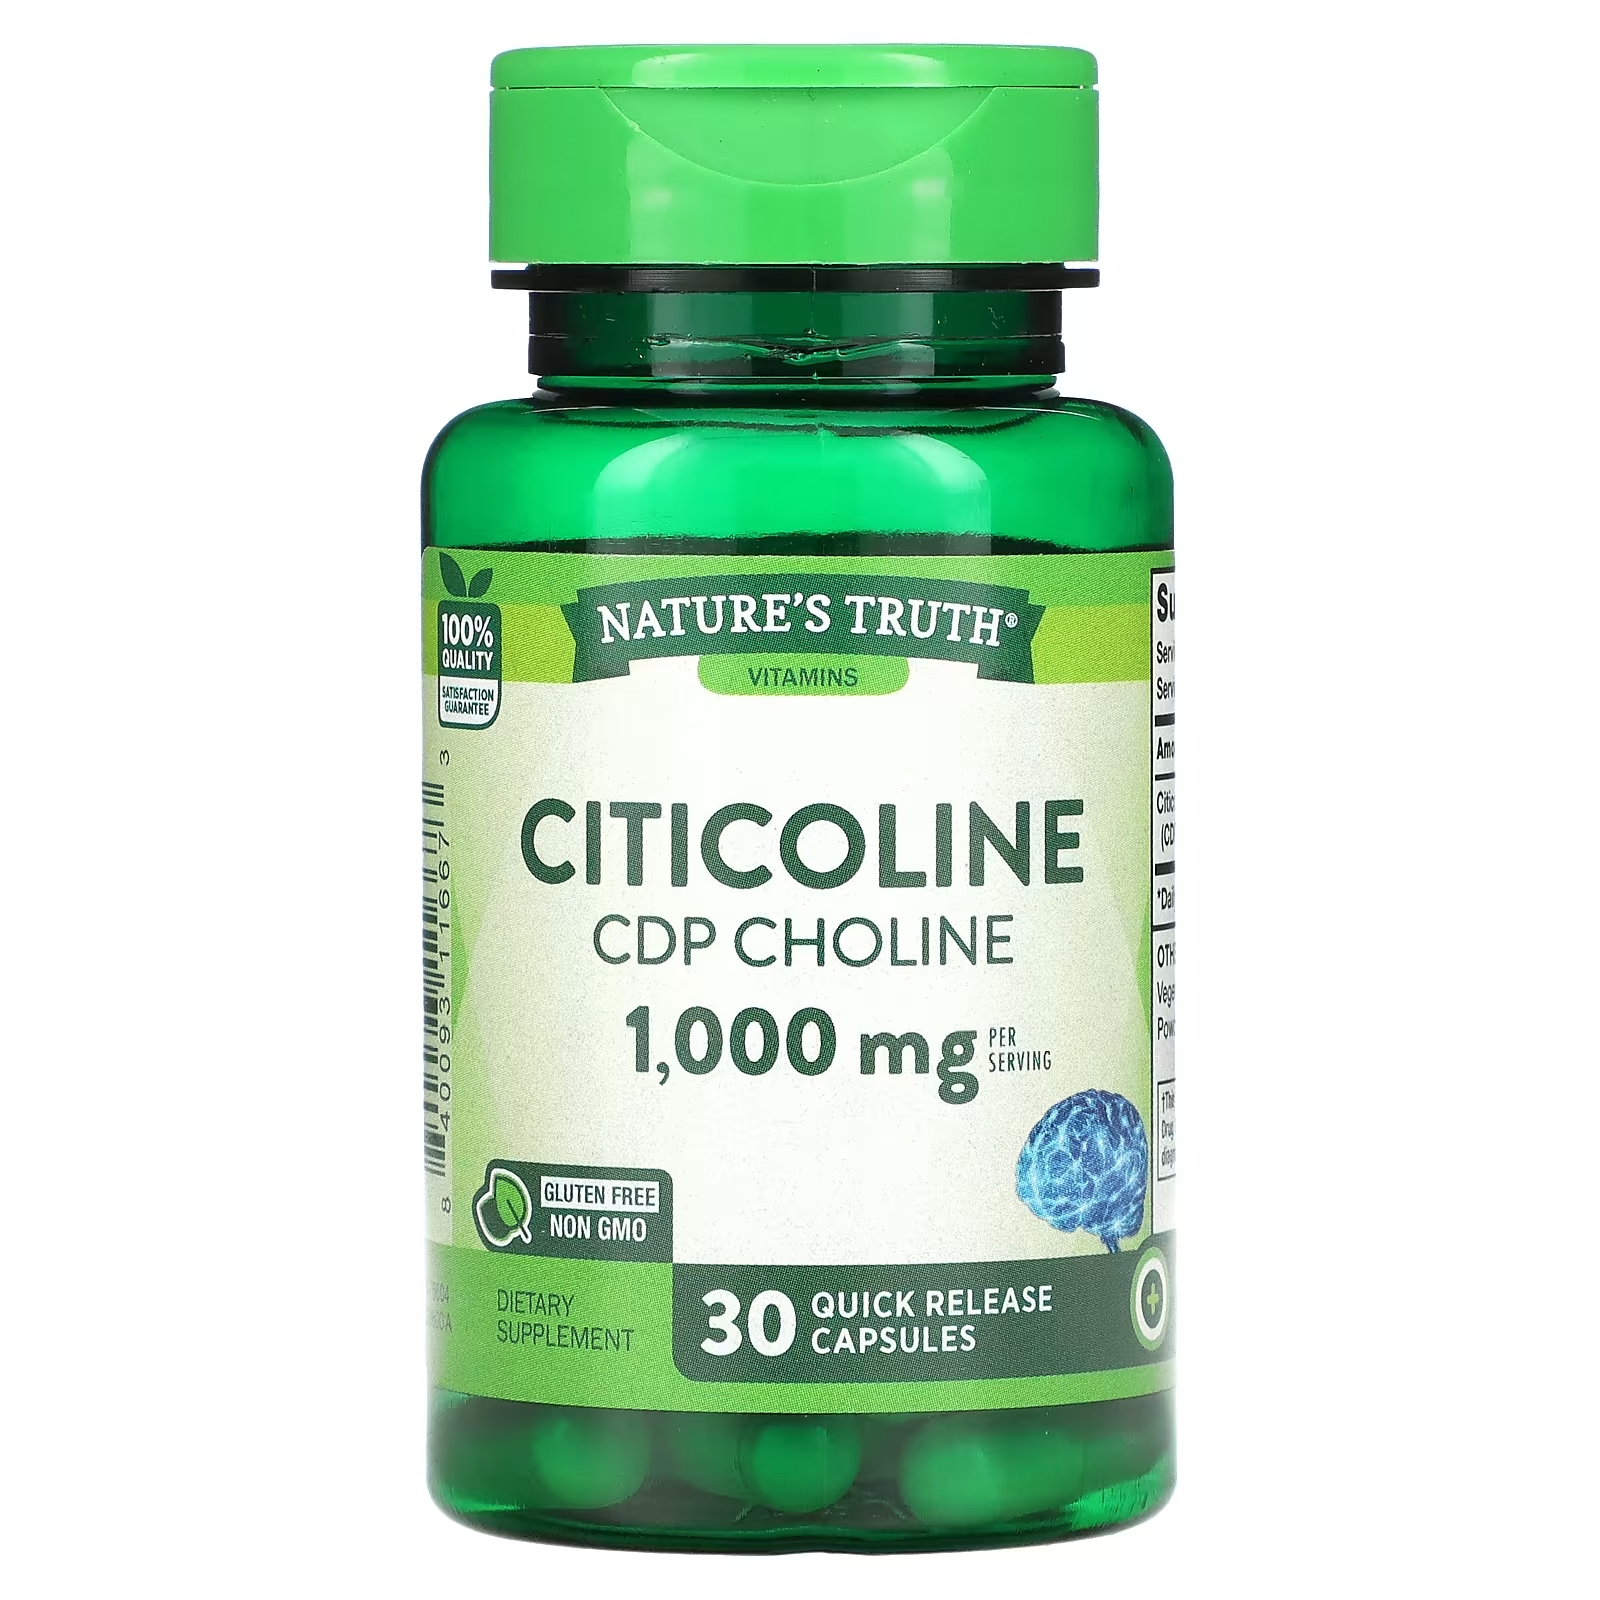 Nature's Truth Citicoline CDP Choline 1000 мг с быстрым высвобождением, 30 капсул nature s truth enhanced absorbs coq 10 200 мг 50 капсул с быстрым высвобождением